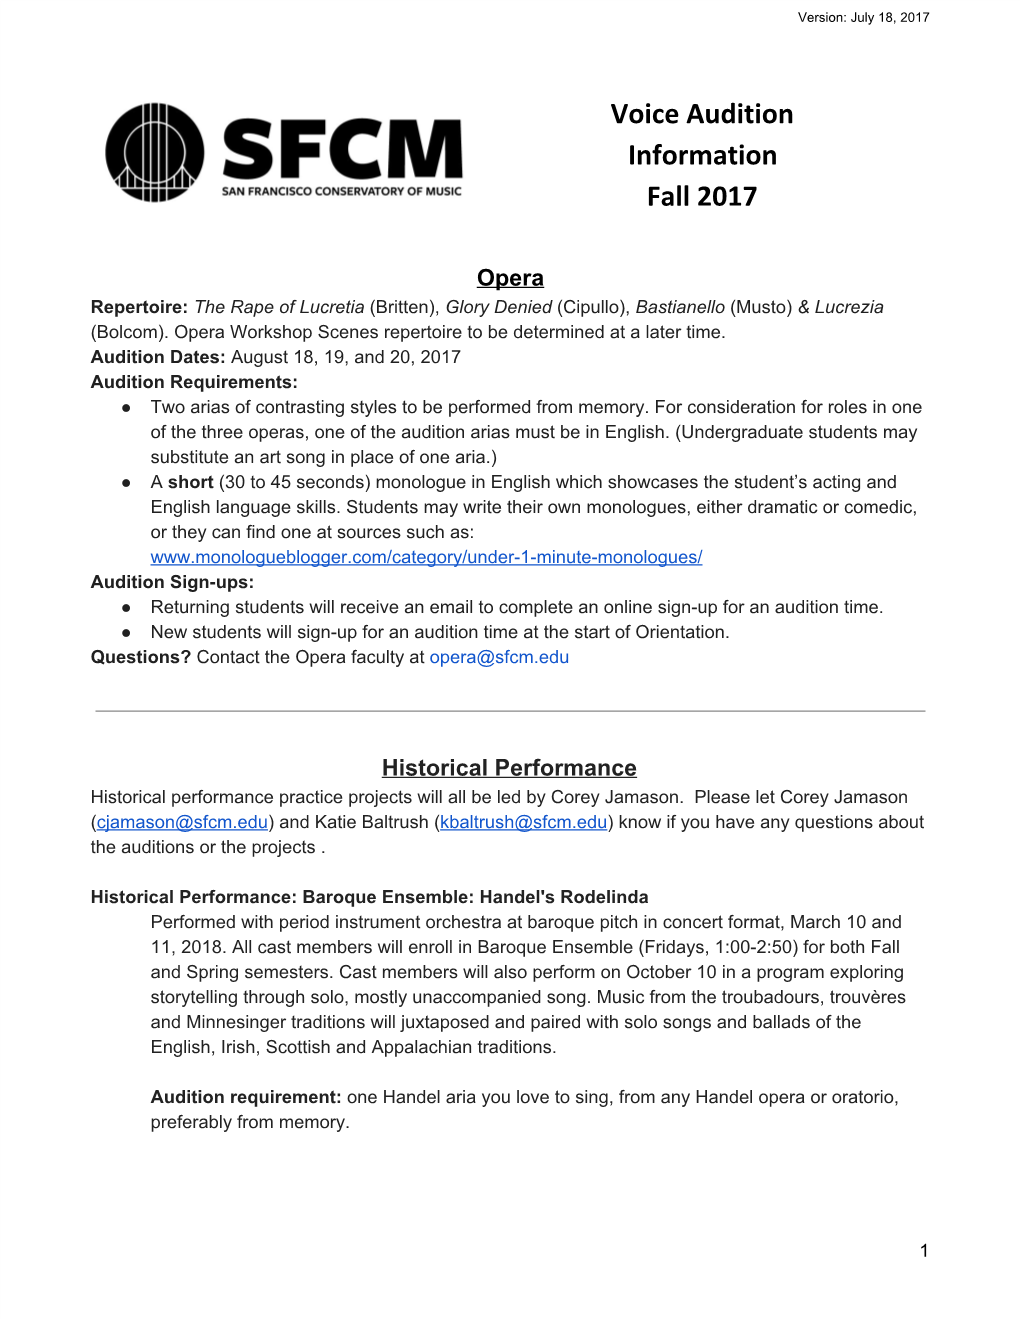 Voice Audition Information Fall 2017